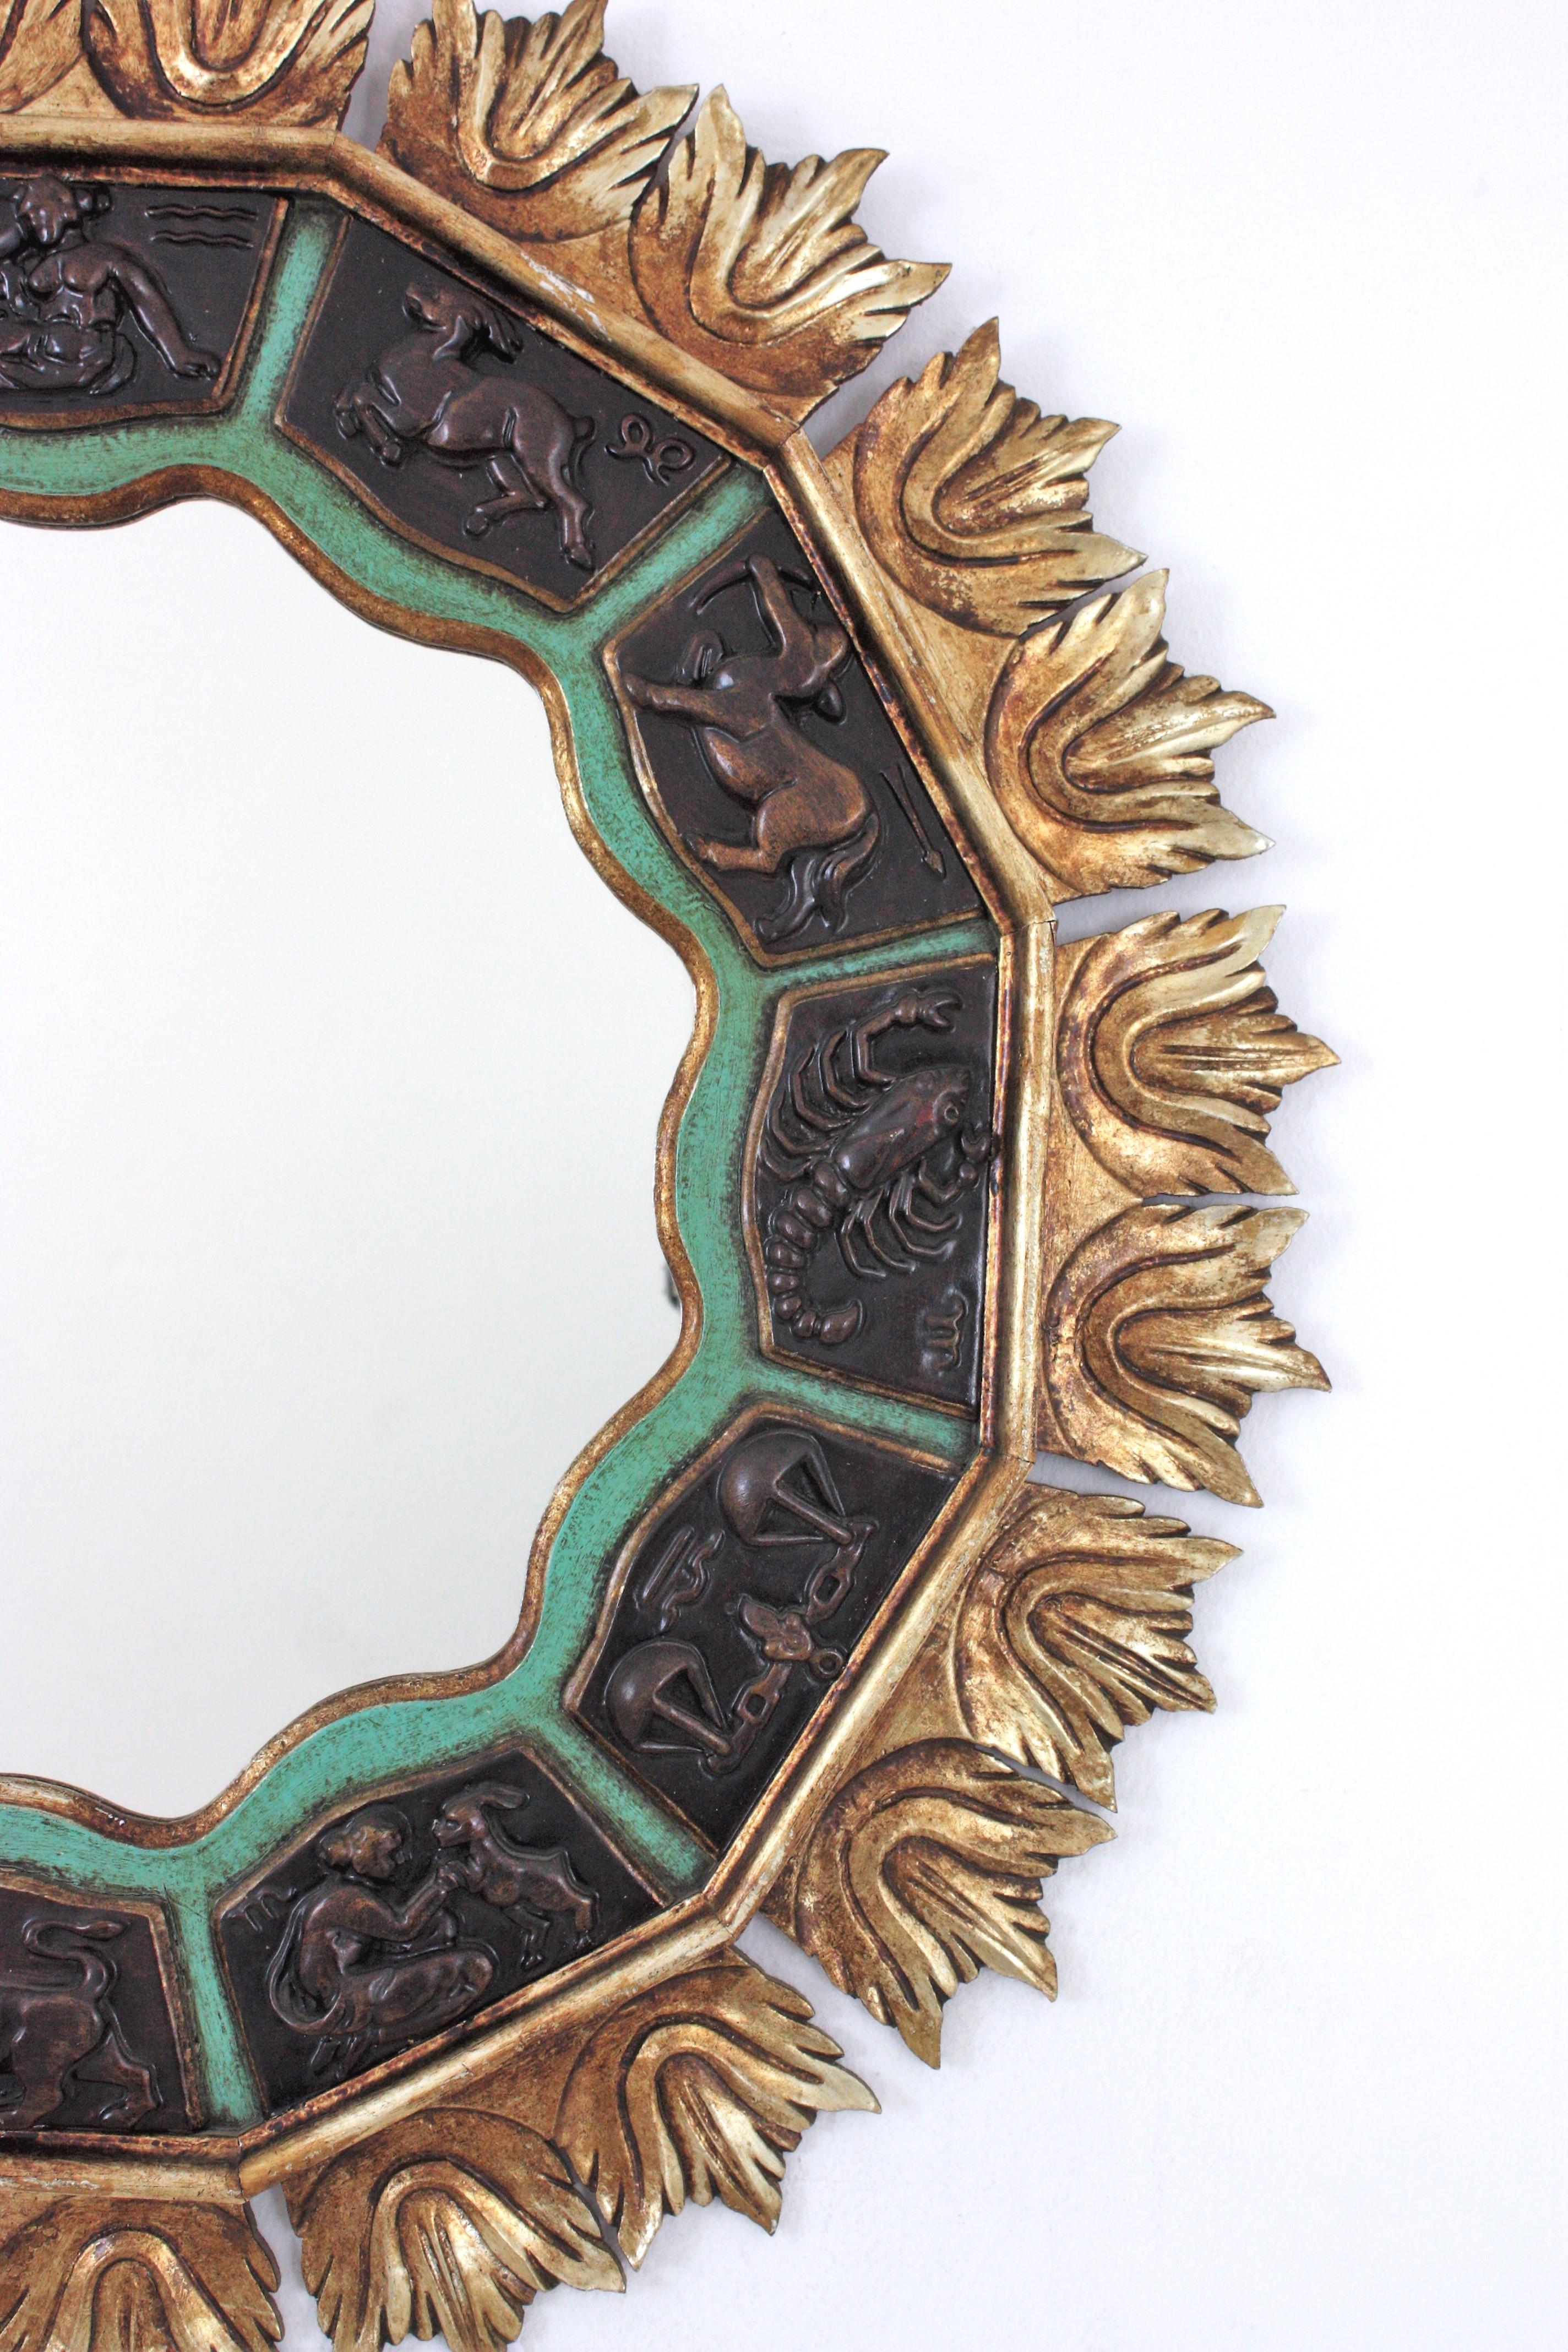 Sunburst Zodiac Mirror with Carved Giltwood & Green Frame, 1950s For Sale 1